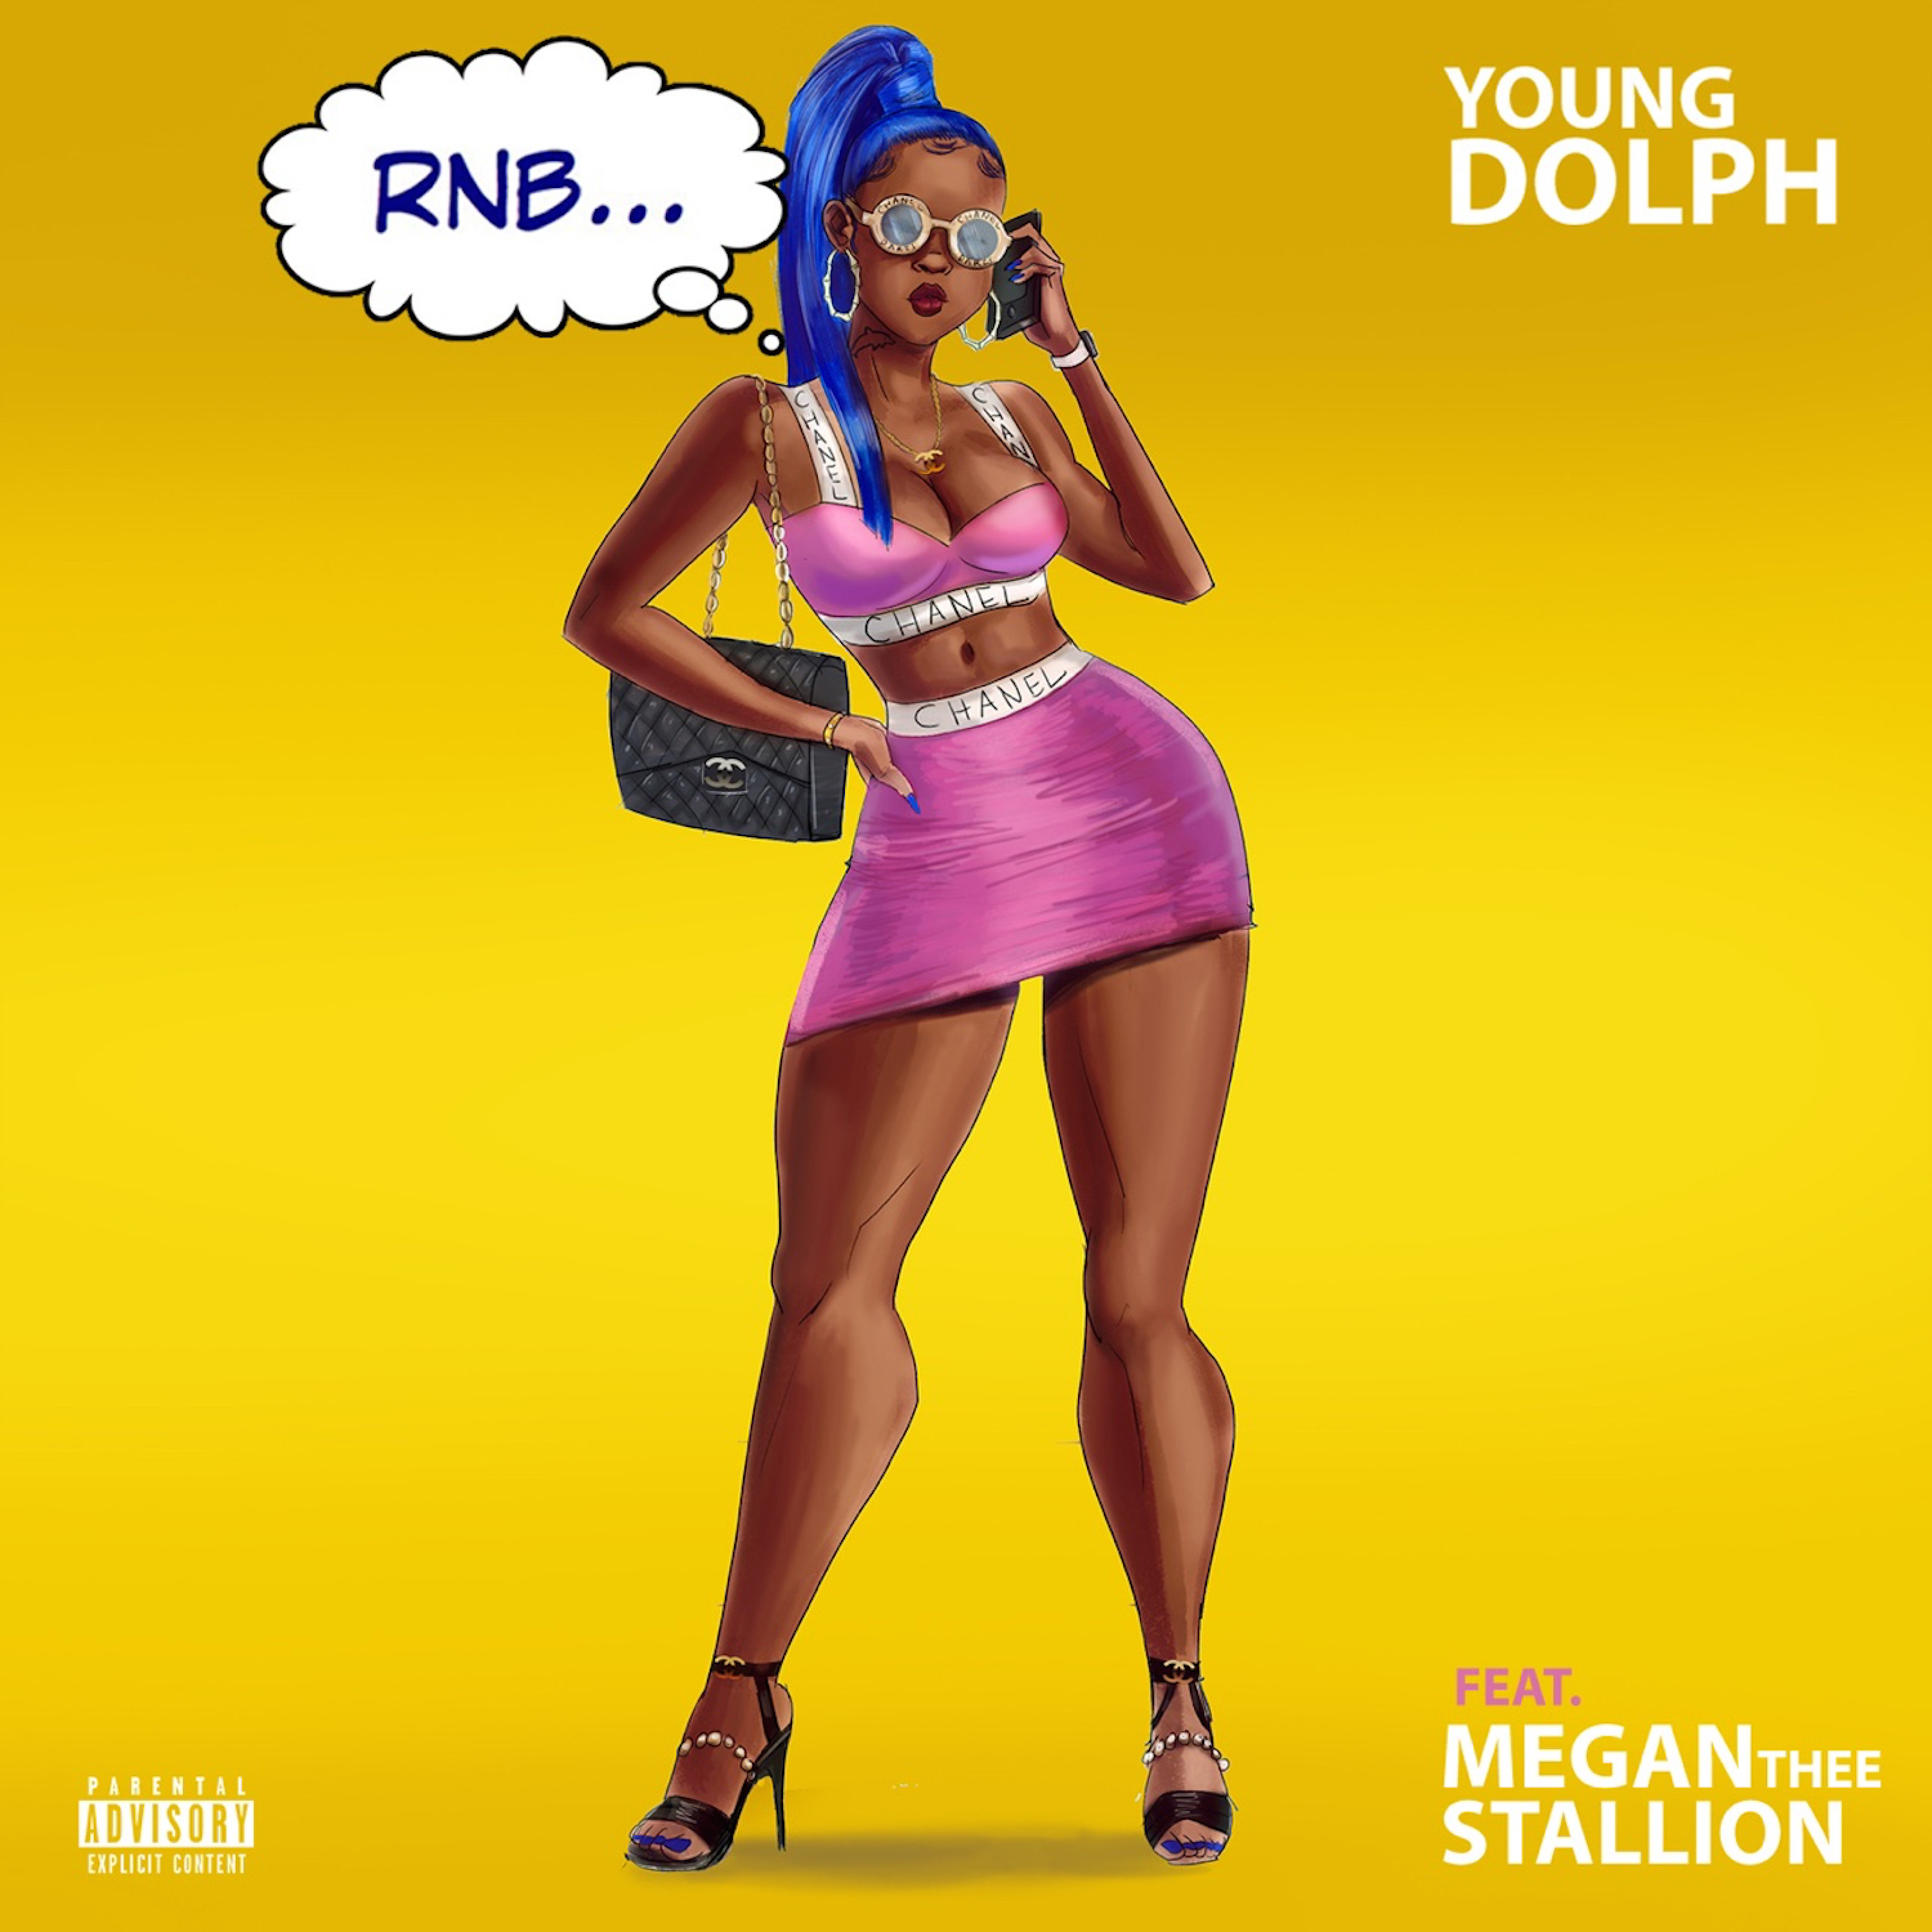 Art for RNB (Megan First) (Dirty) by Young Dolph Ft. Megan Thee Stallion